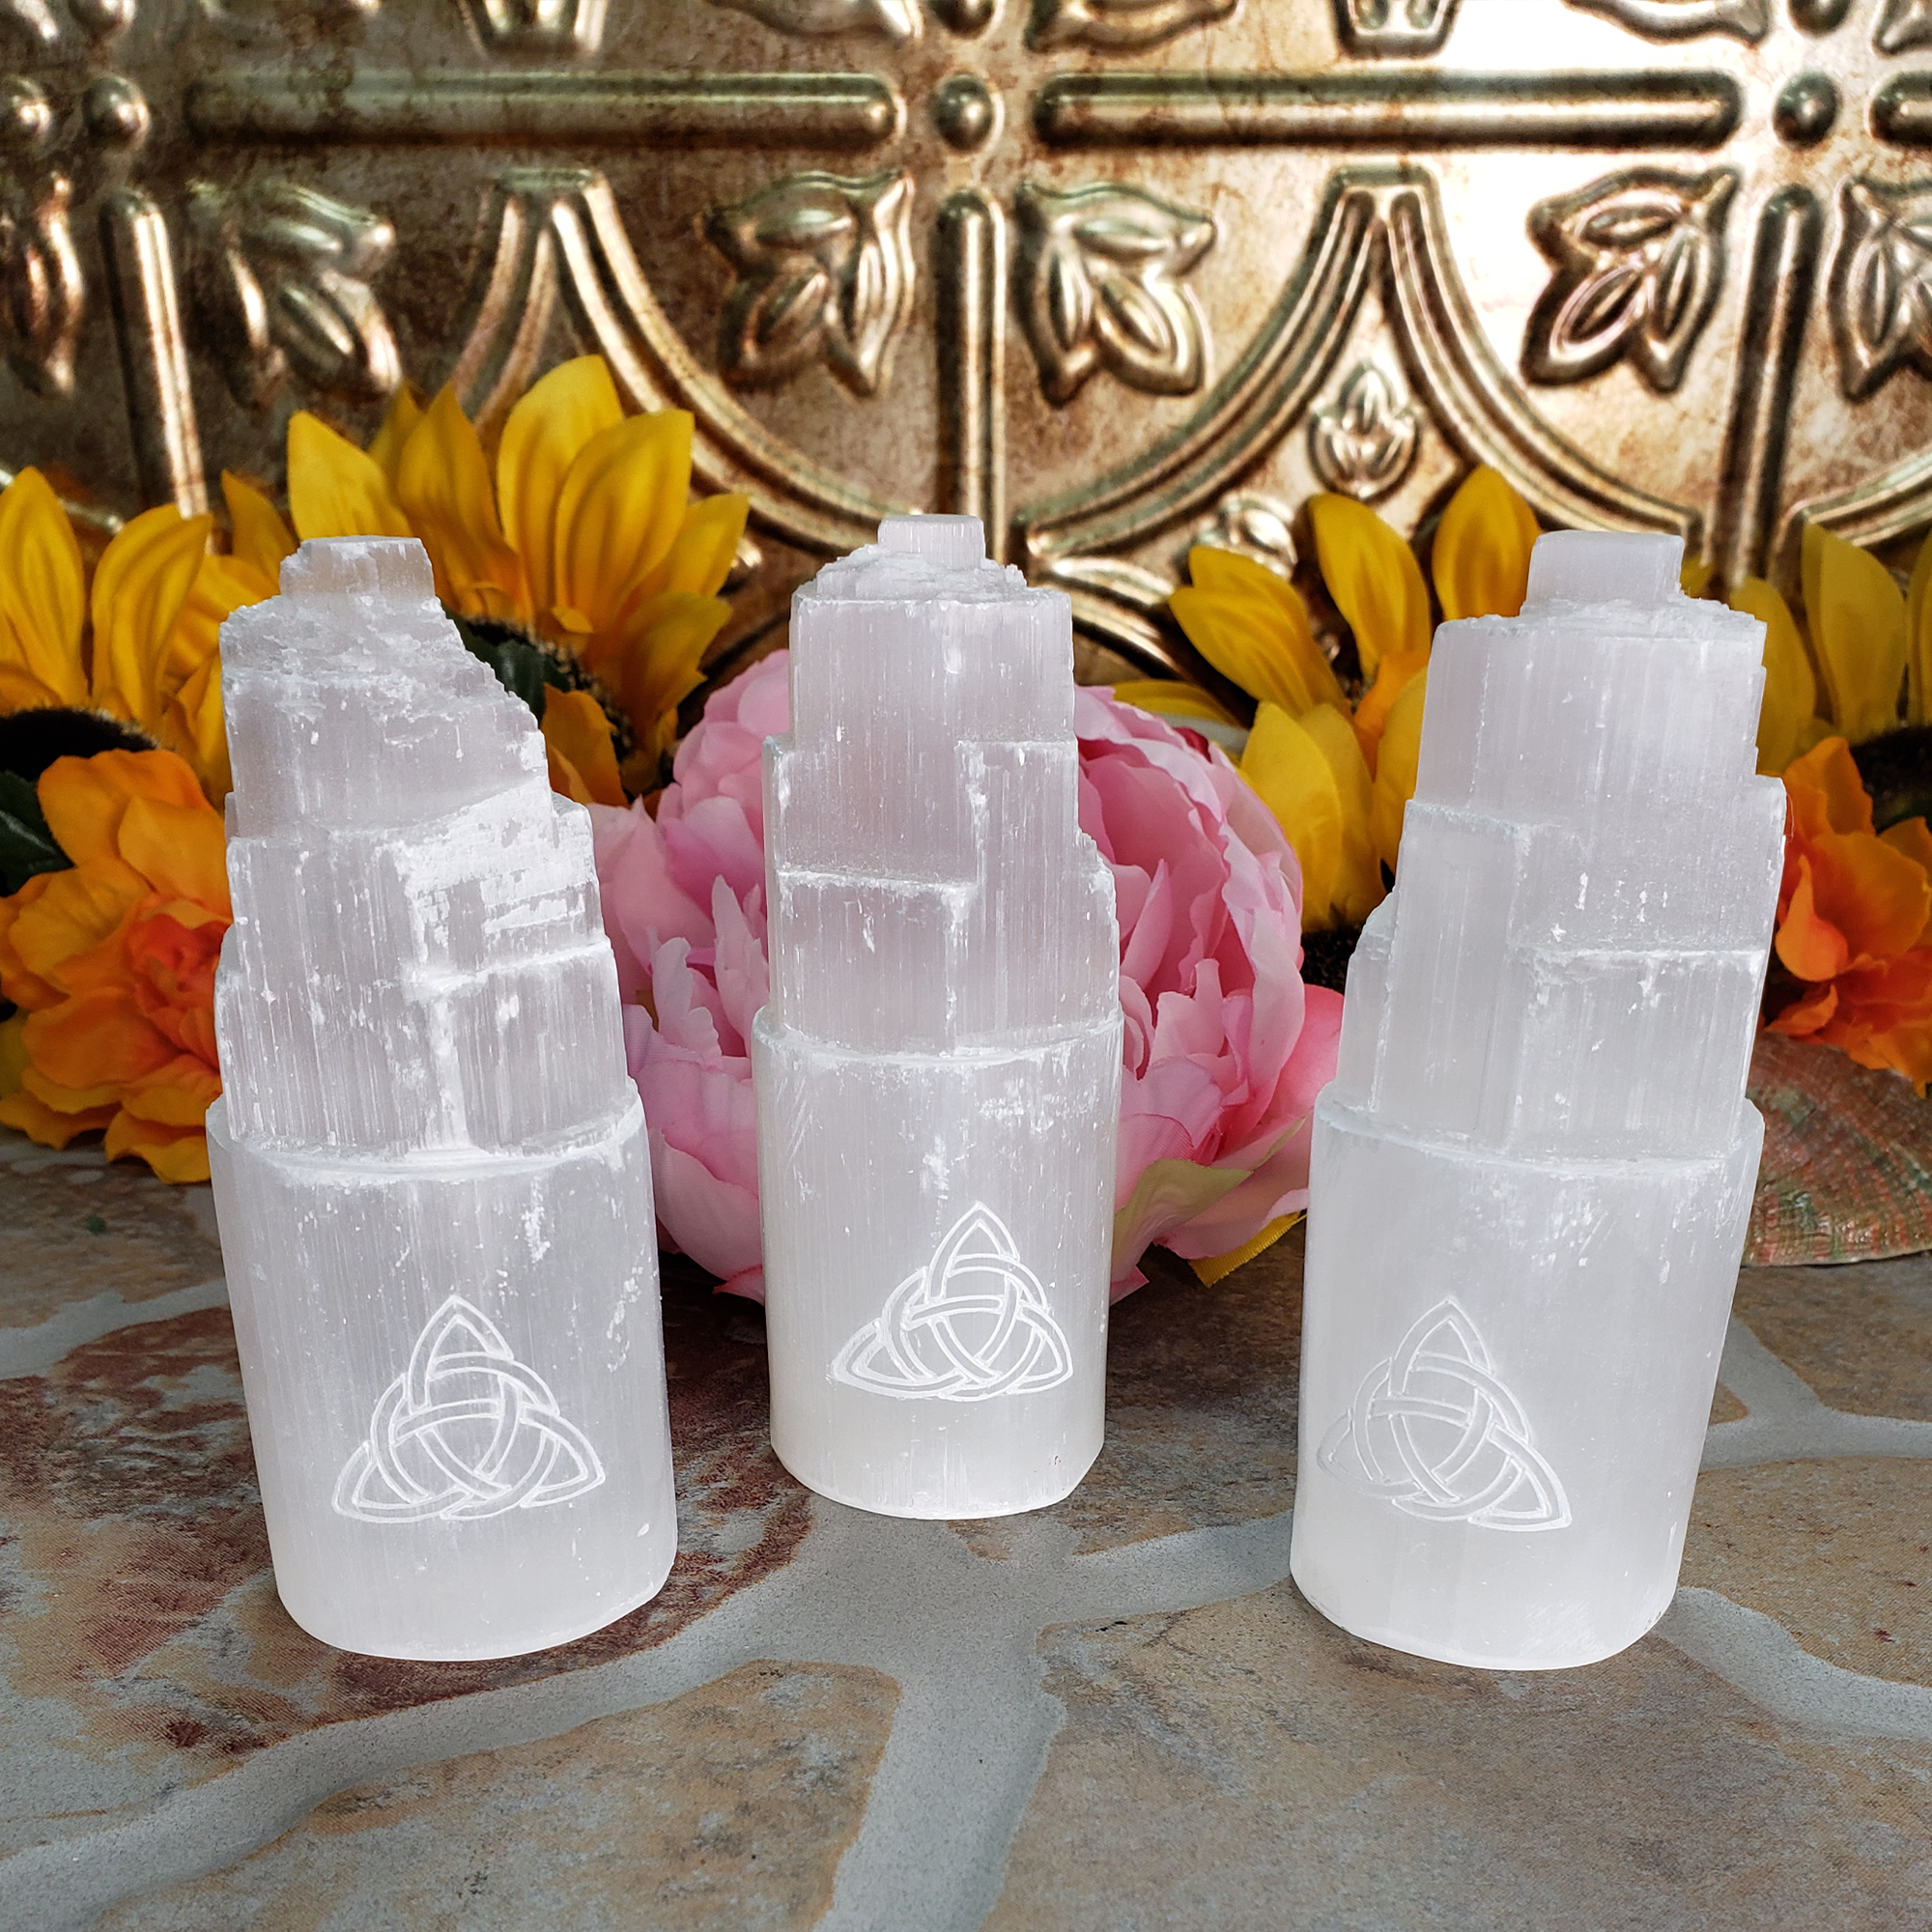 White Selenite Crystal Tower - Engraved with Triquetra - Group Photo for Comparison